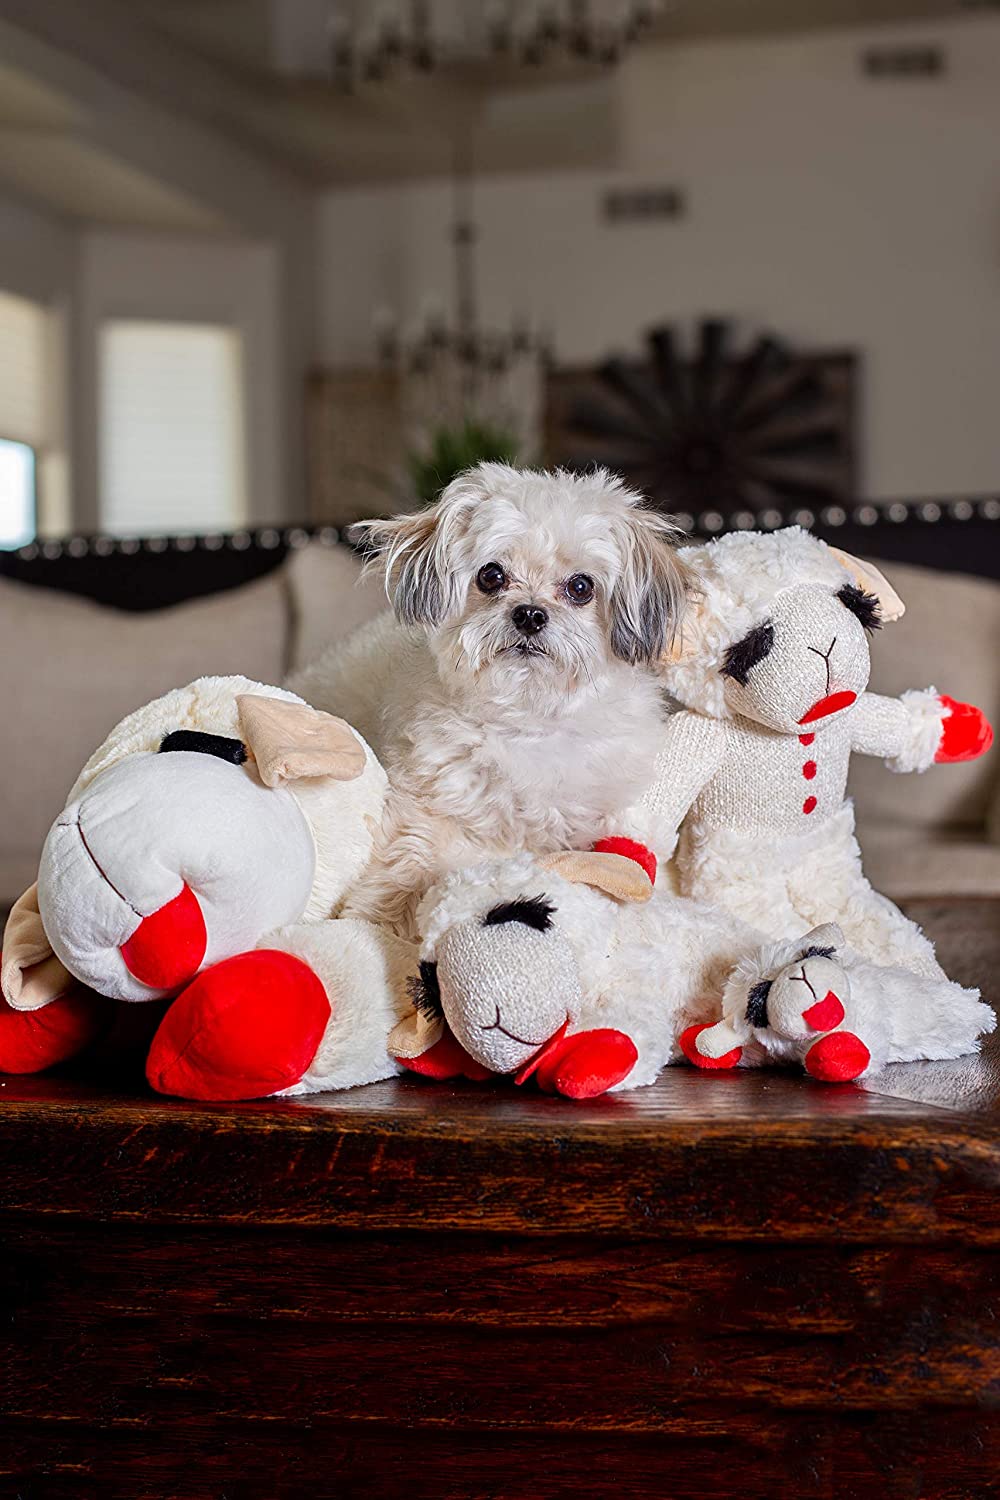 Keep Your Dog Active and Entertained with These 4 Best Dog Toys!